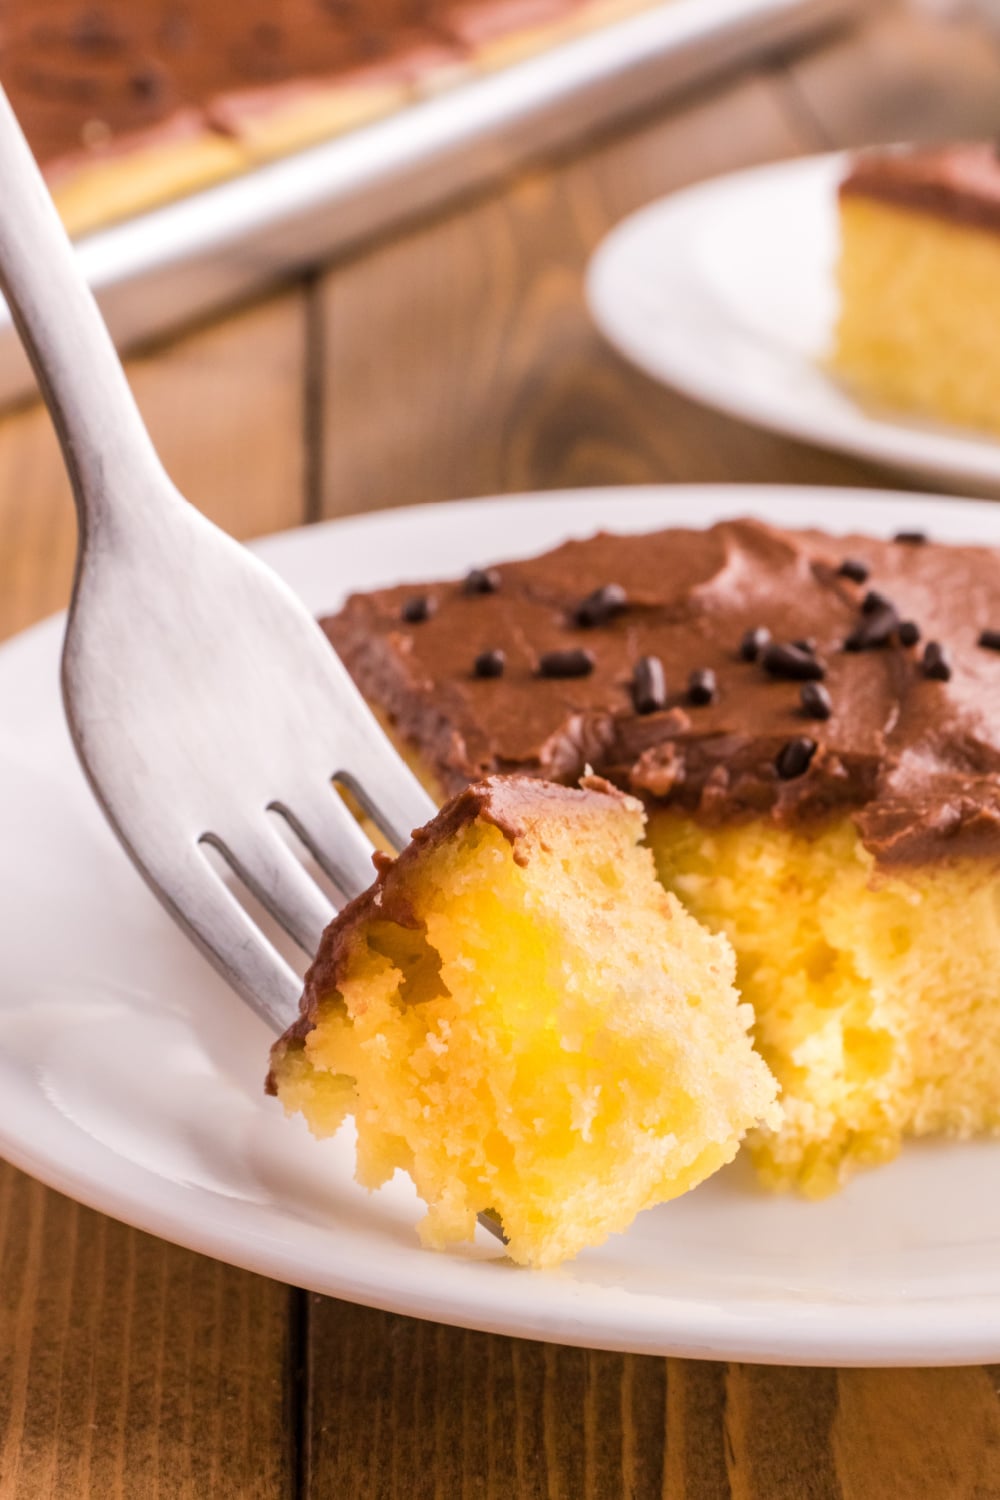 A single bite of Yellow Cake with Chocolate Frosting on a fork.